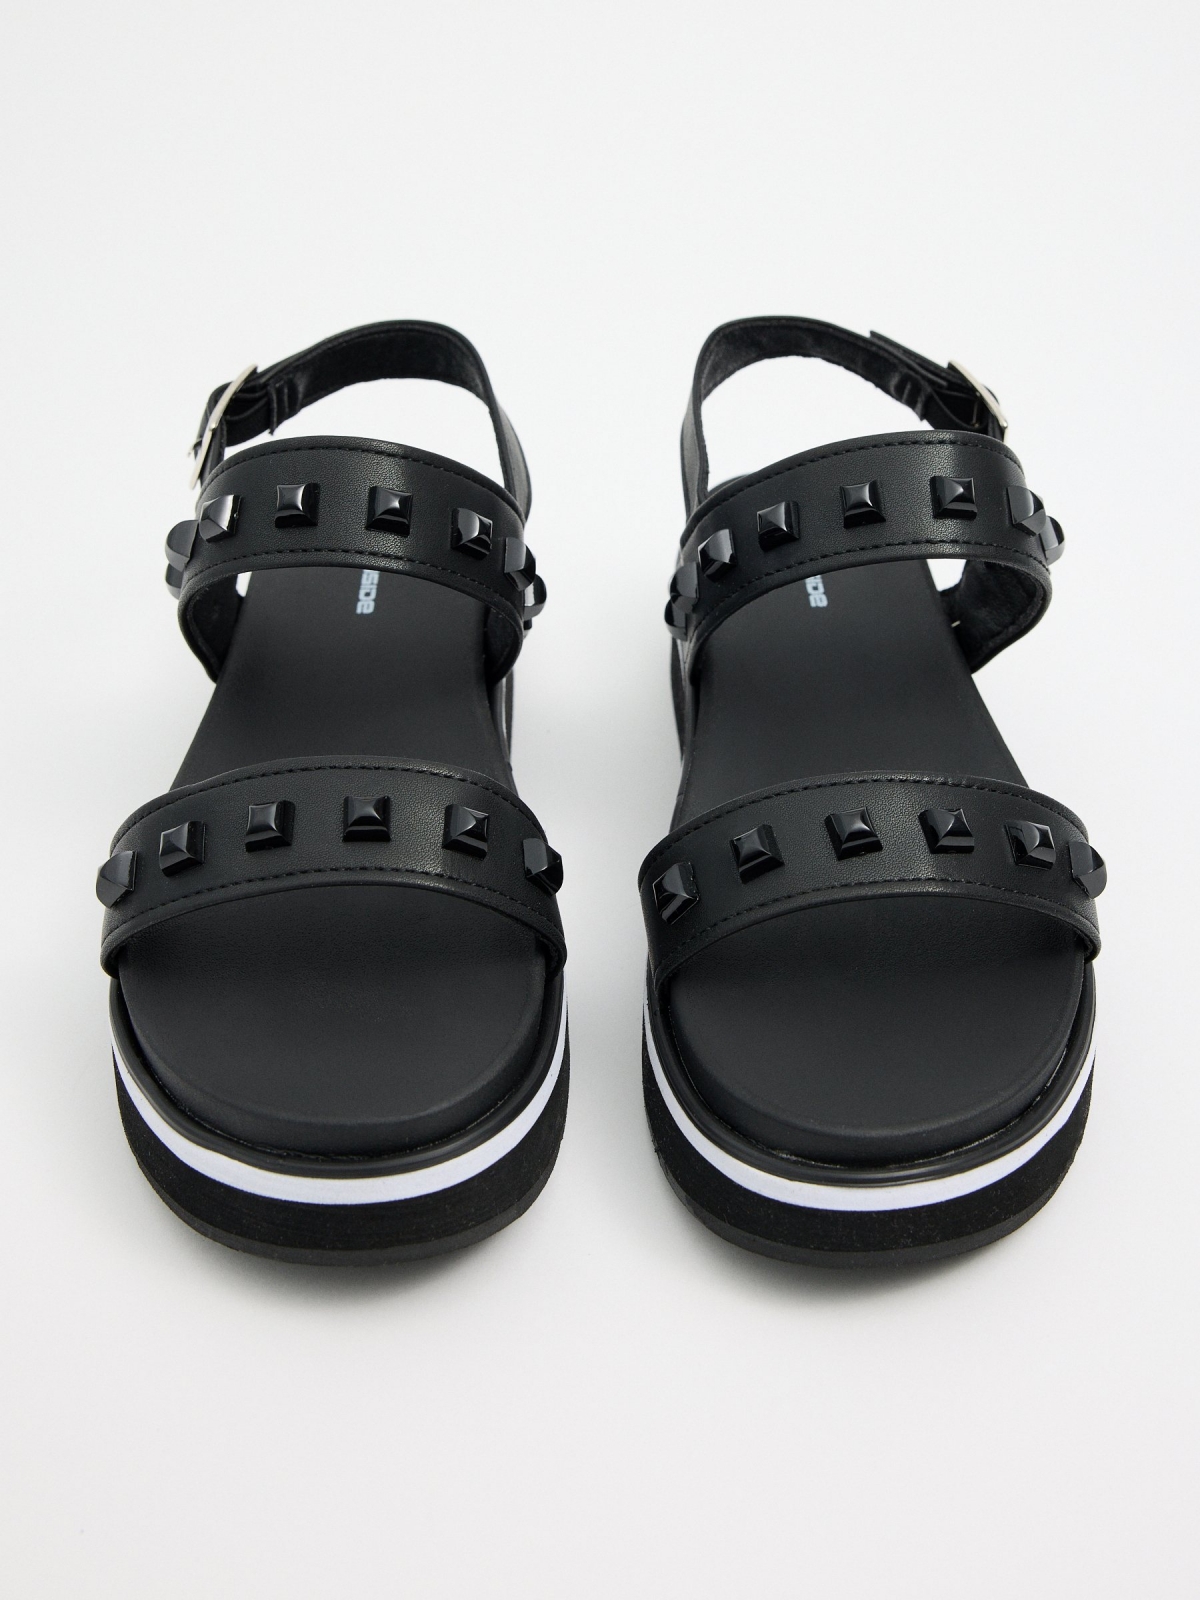 Studded leather effect sandal black zenithal view